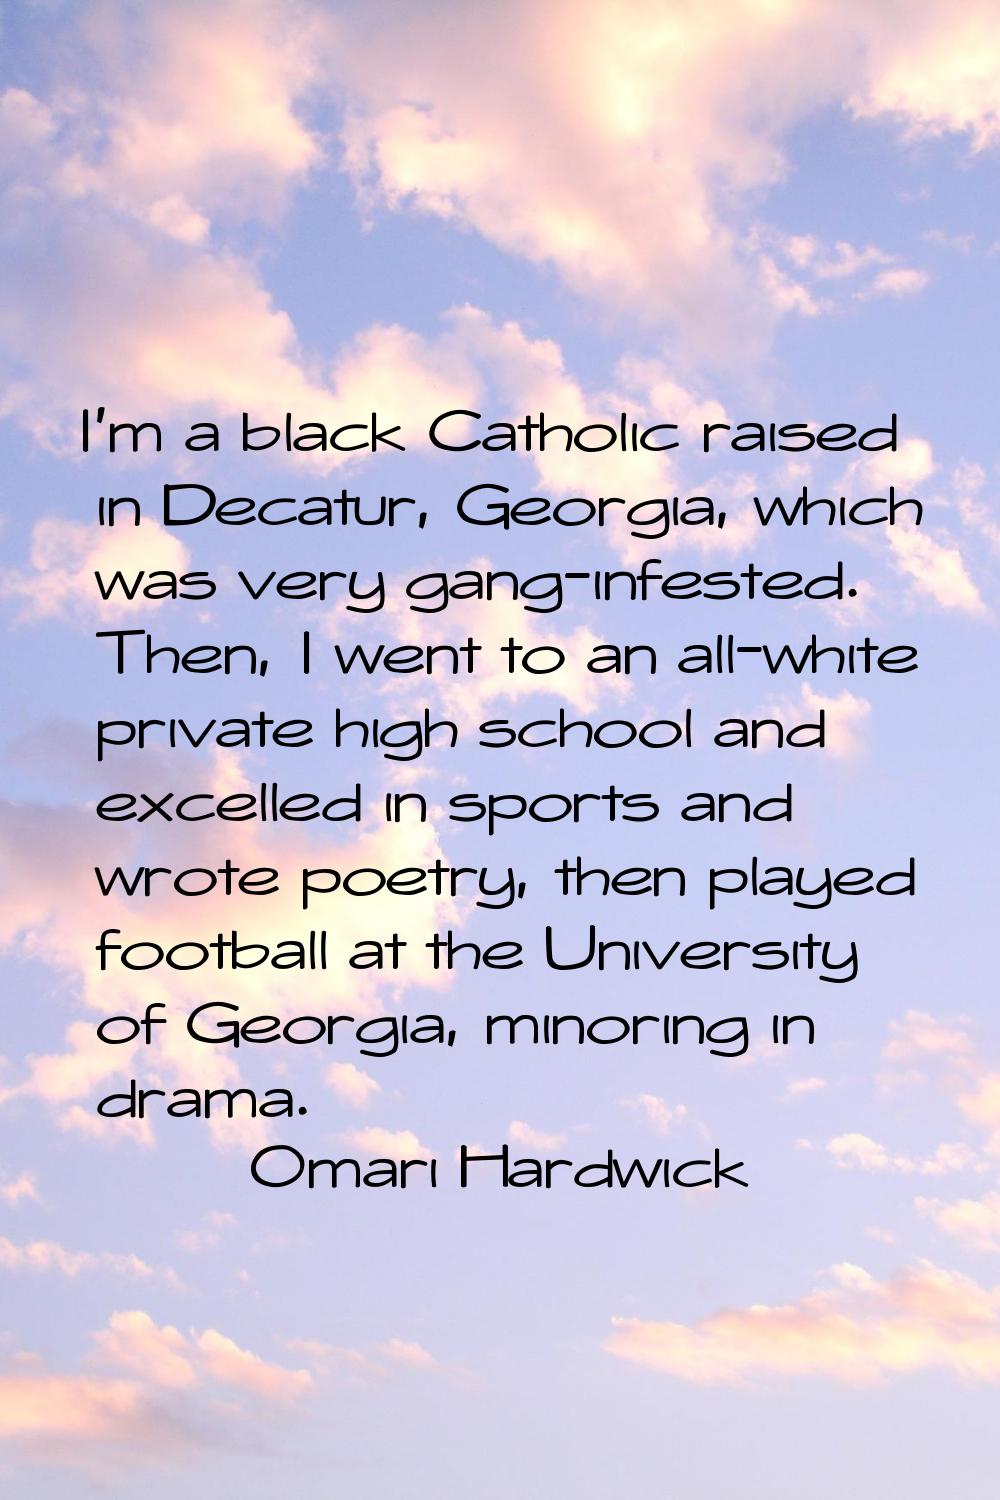 I'm a black Catholic raised in Decatur, Georgia, which was very gang-infested. Then, I went to an a